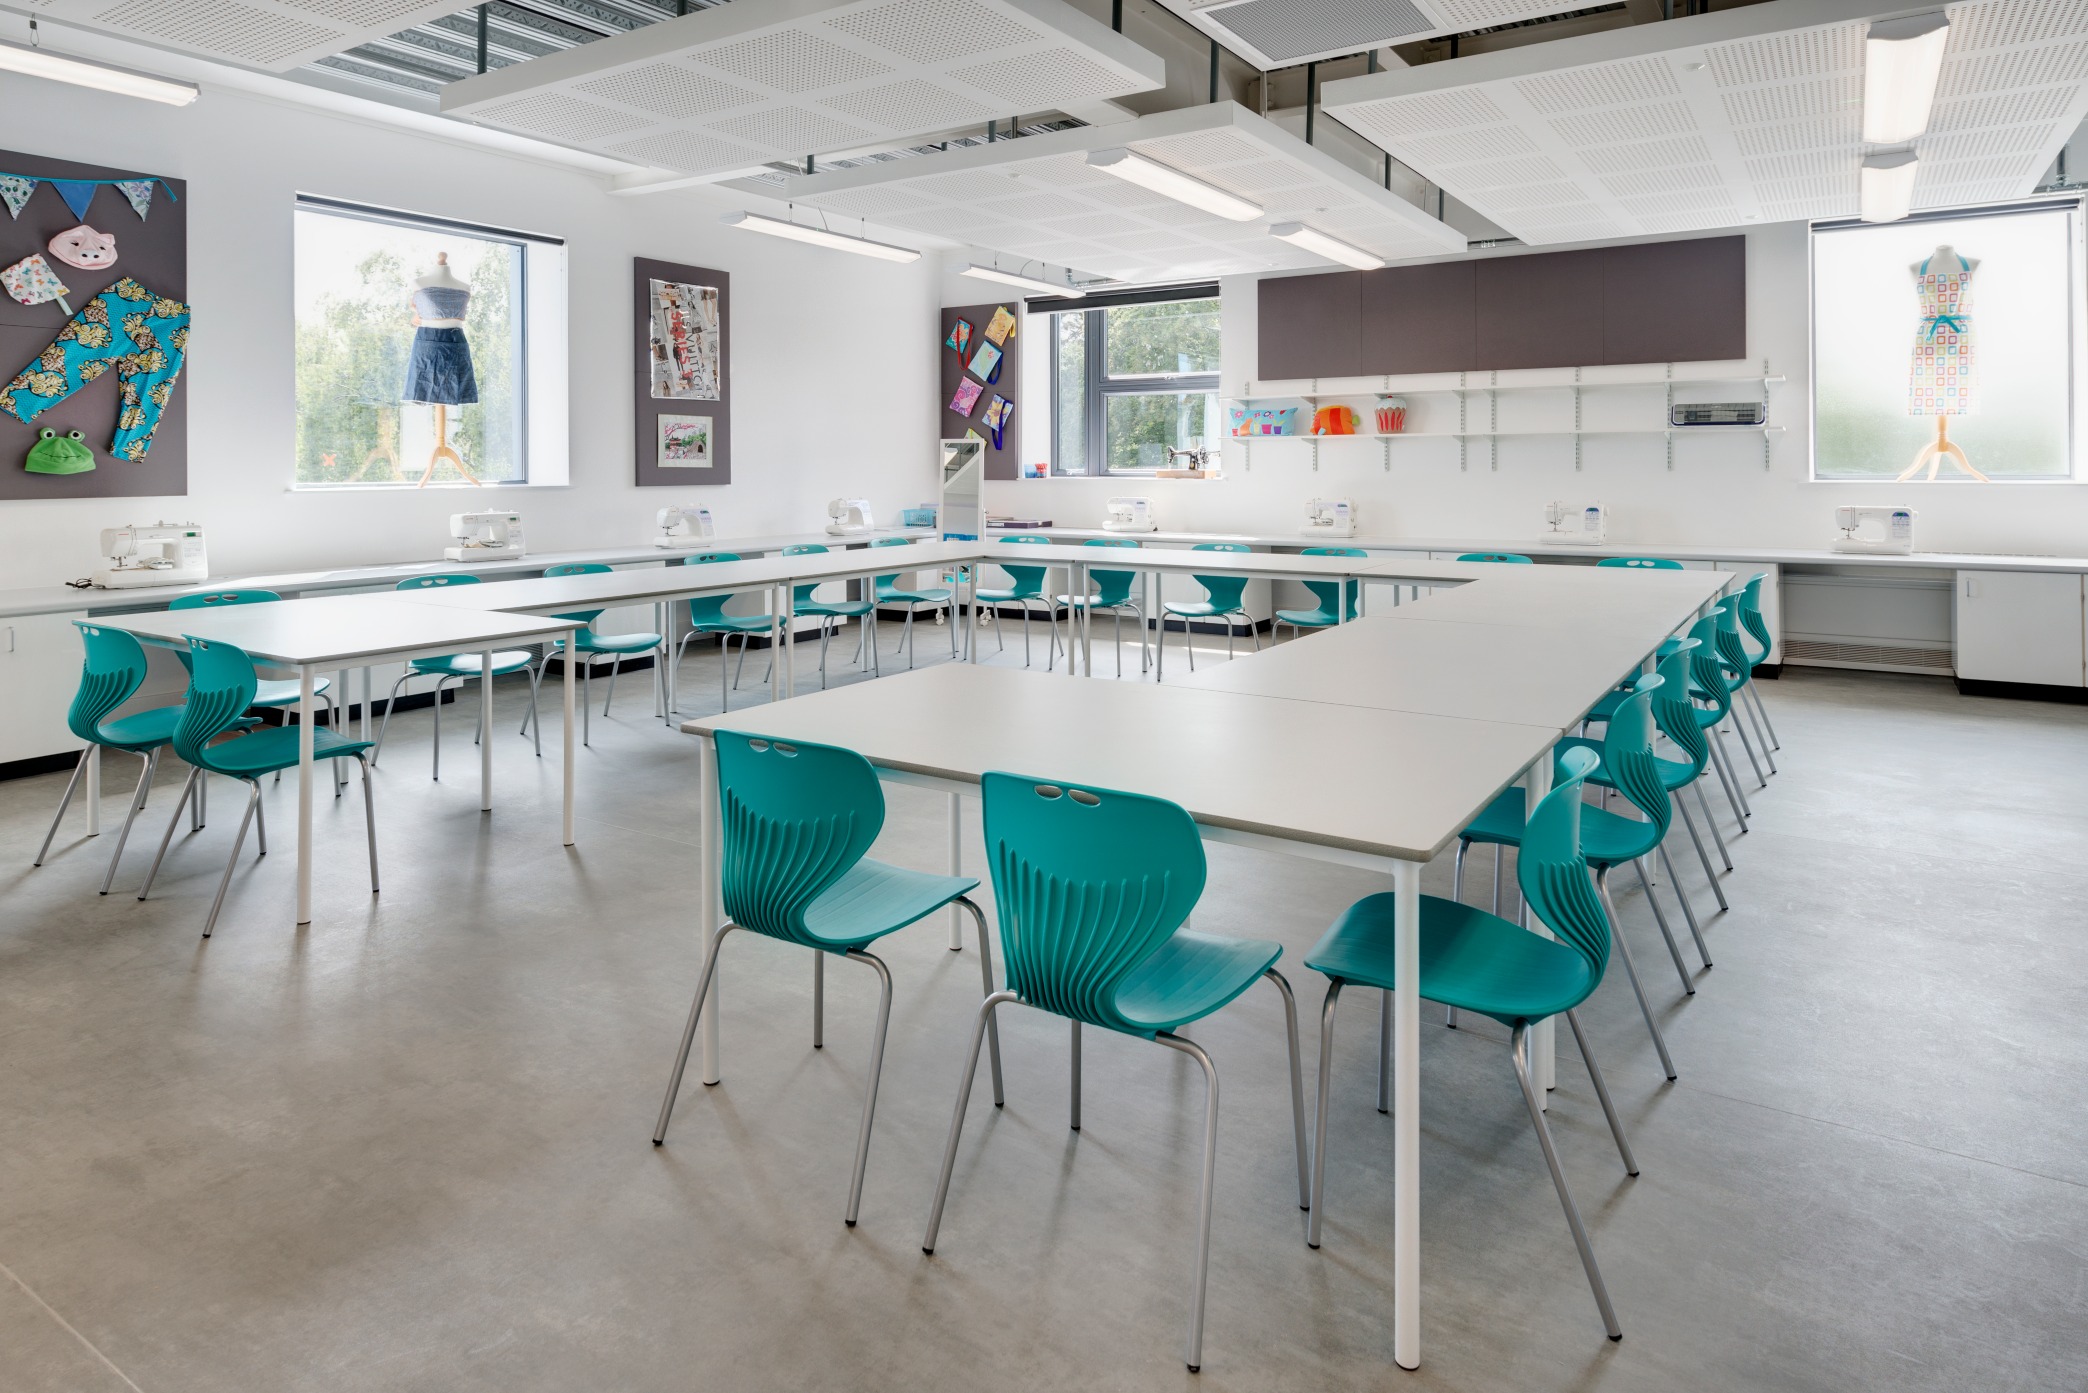 The Importance of Selecting the Correct Education Furniture